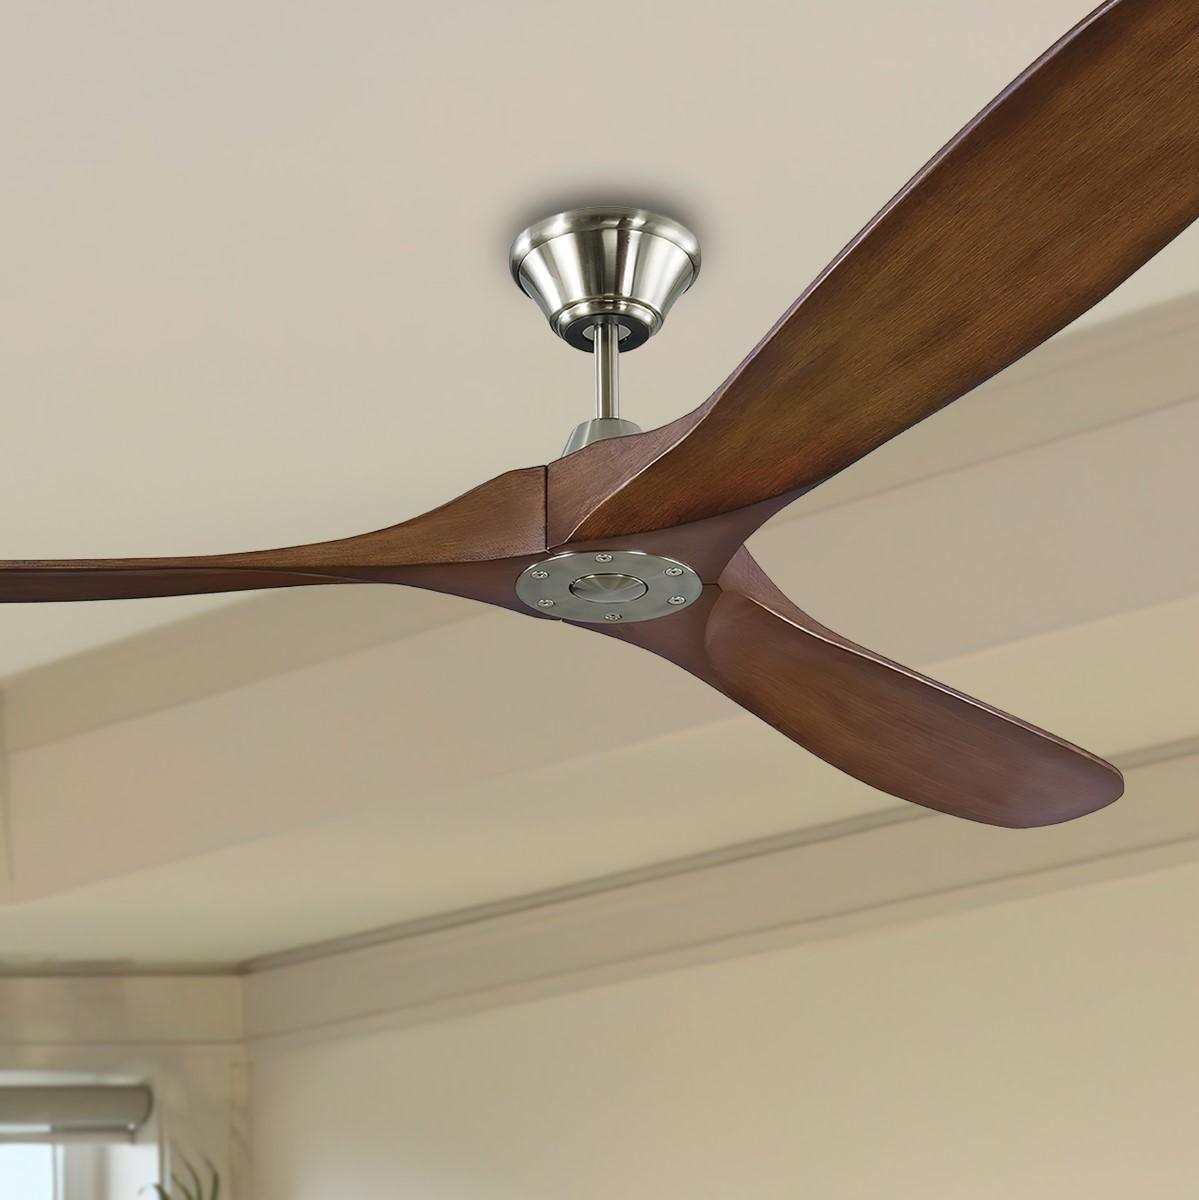 Maverick Max 70 Inch Modern Large Propeller Outdoor Ceiling Fan With Remote - Bees Lighting